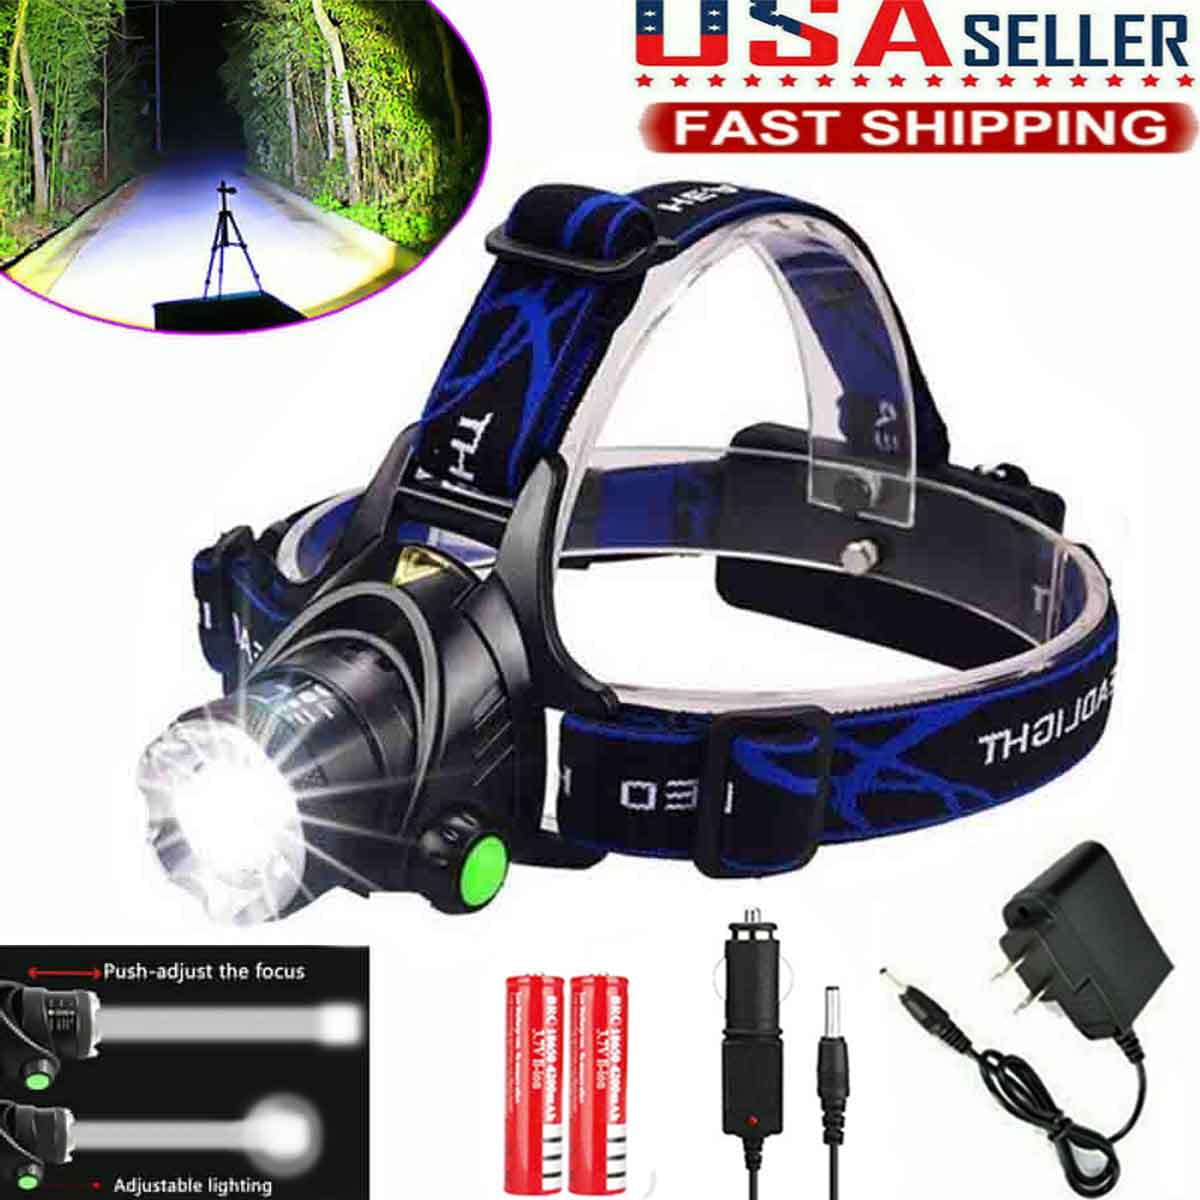 Brightest T6 LED Headlamp 990000LM Rechargeable Headlight Flashlight Head Torch 